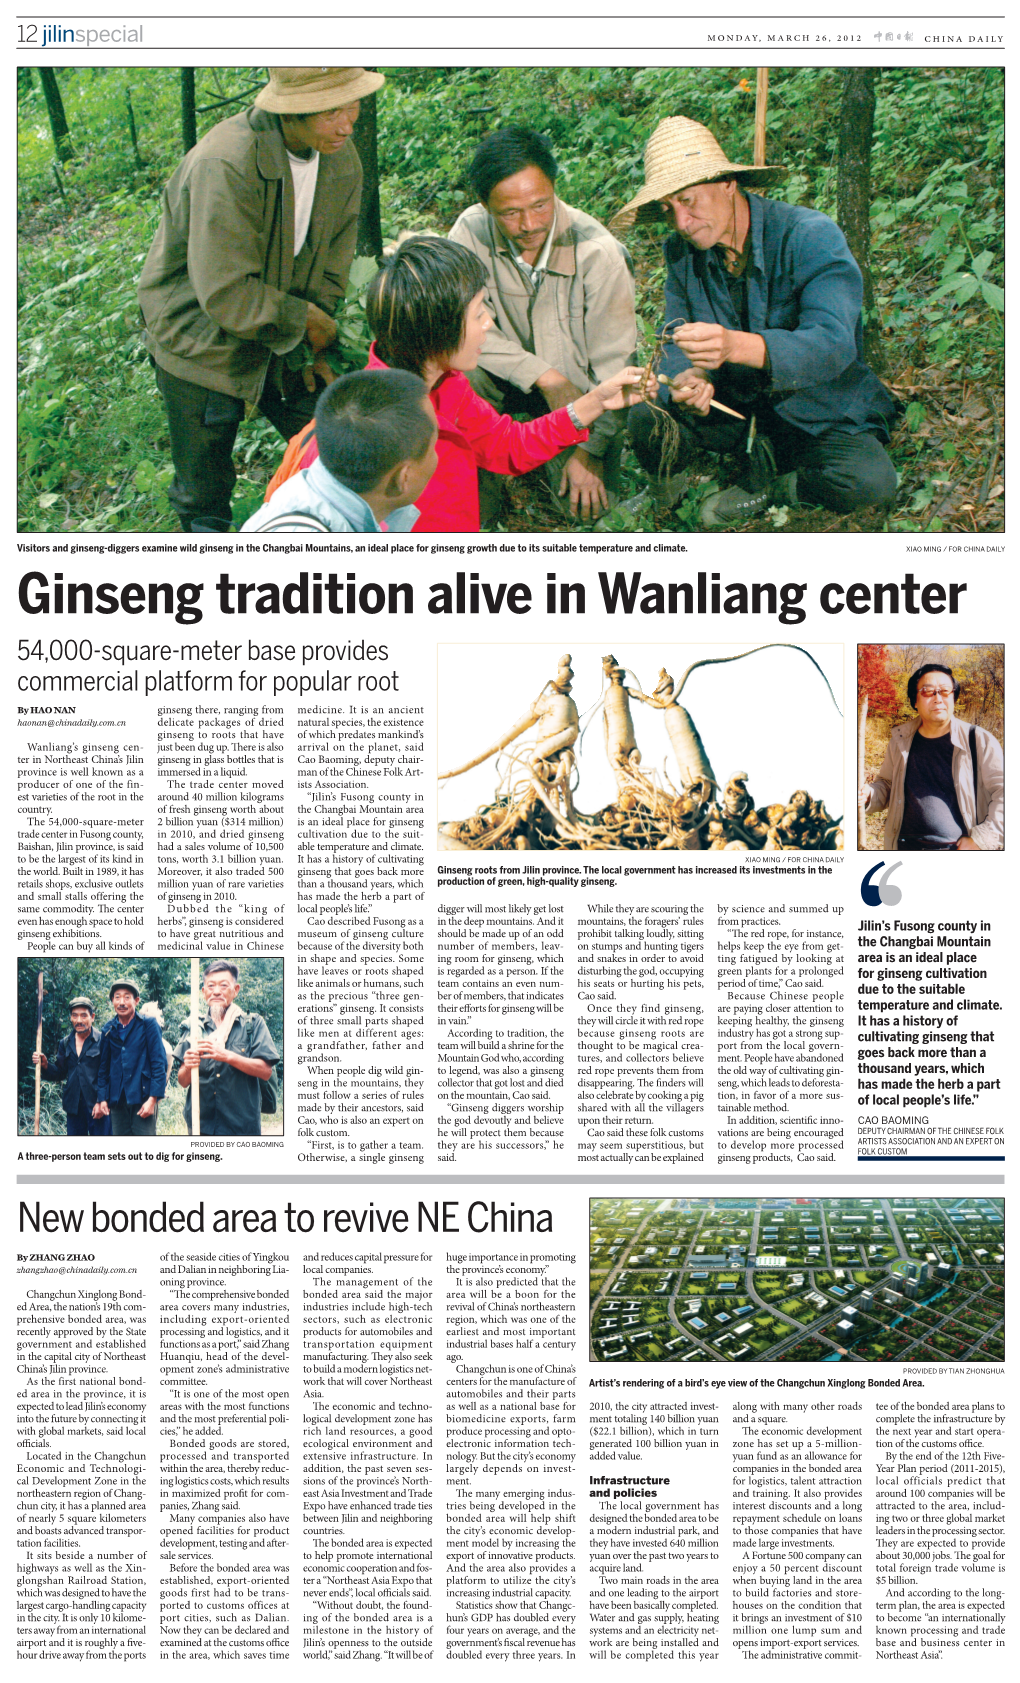 Ginseng Tradition Alive in Wanliang Center 54,000-Square-Meter Base Provides Commercial Platform for Popular Root